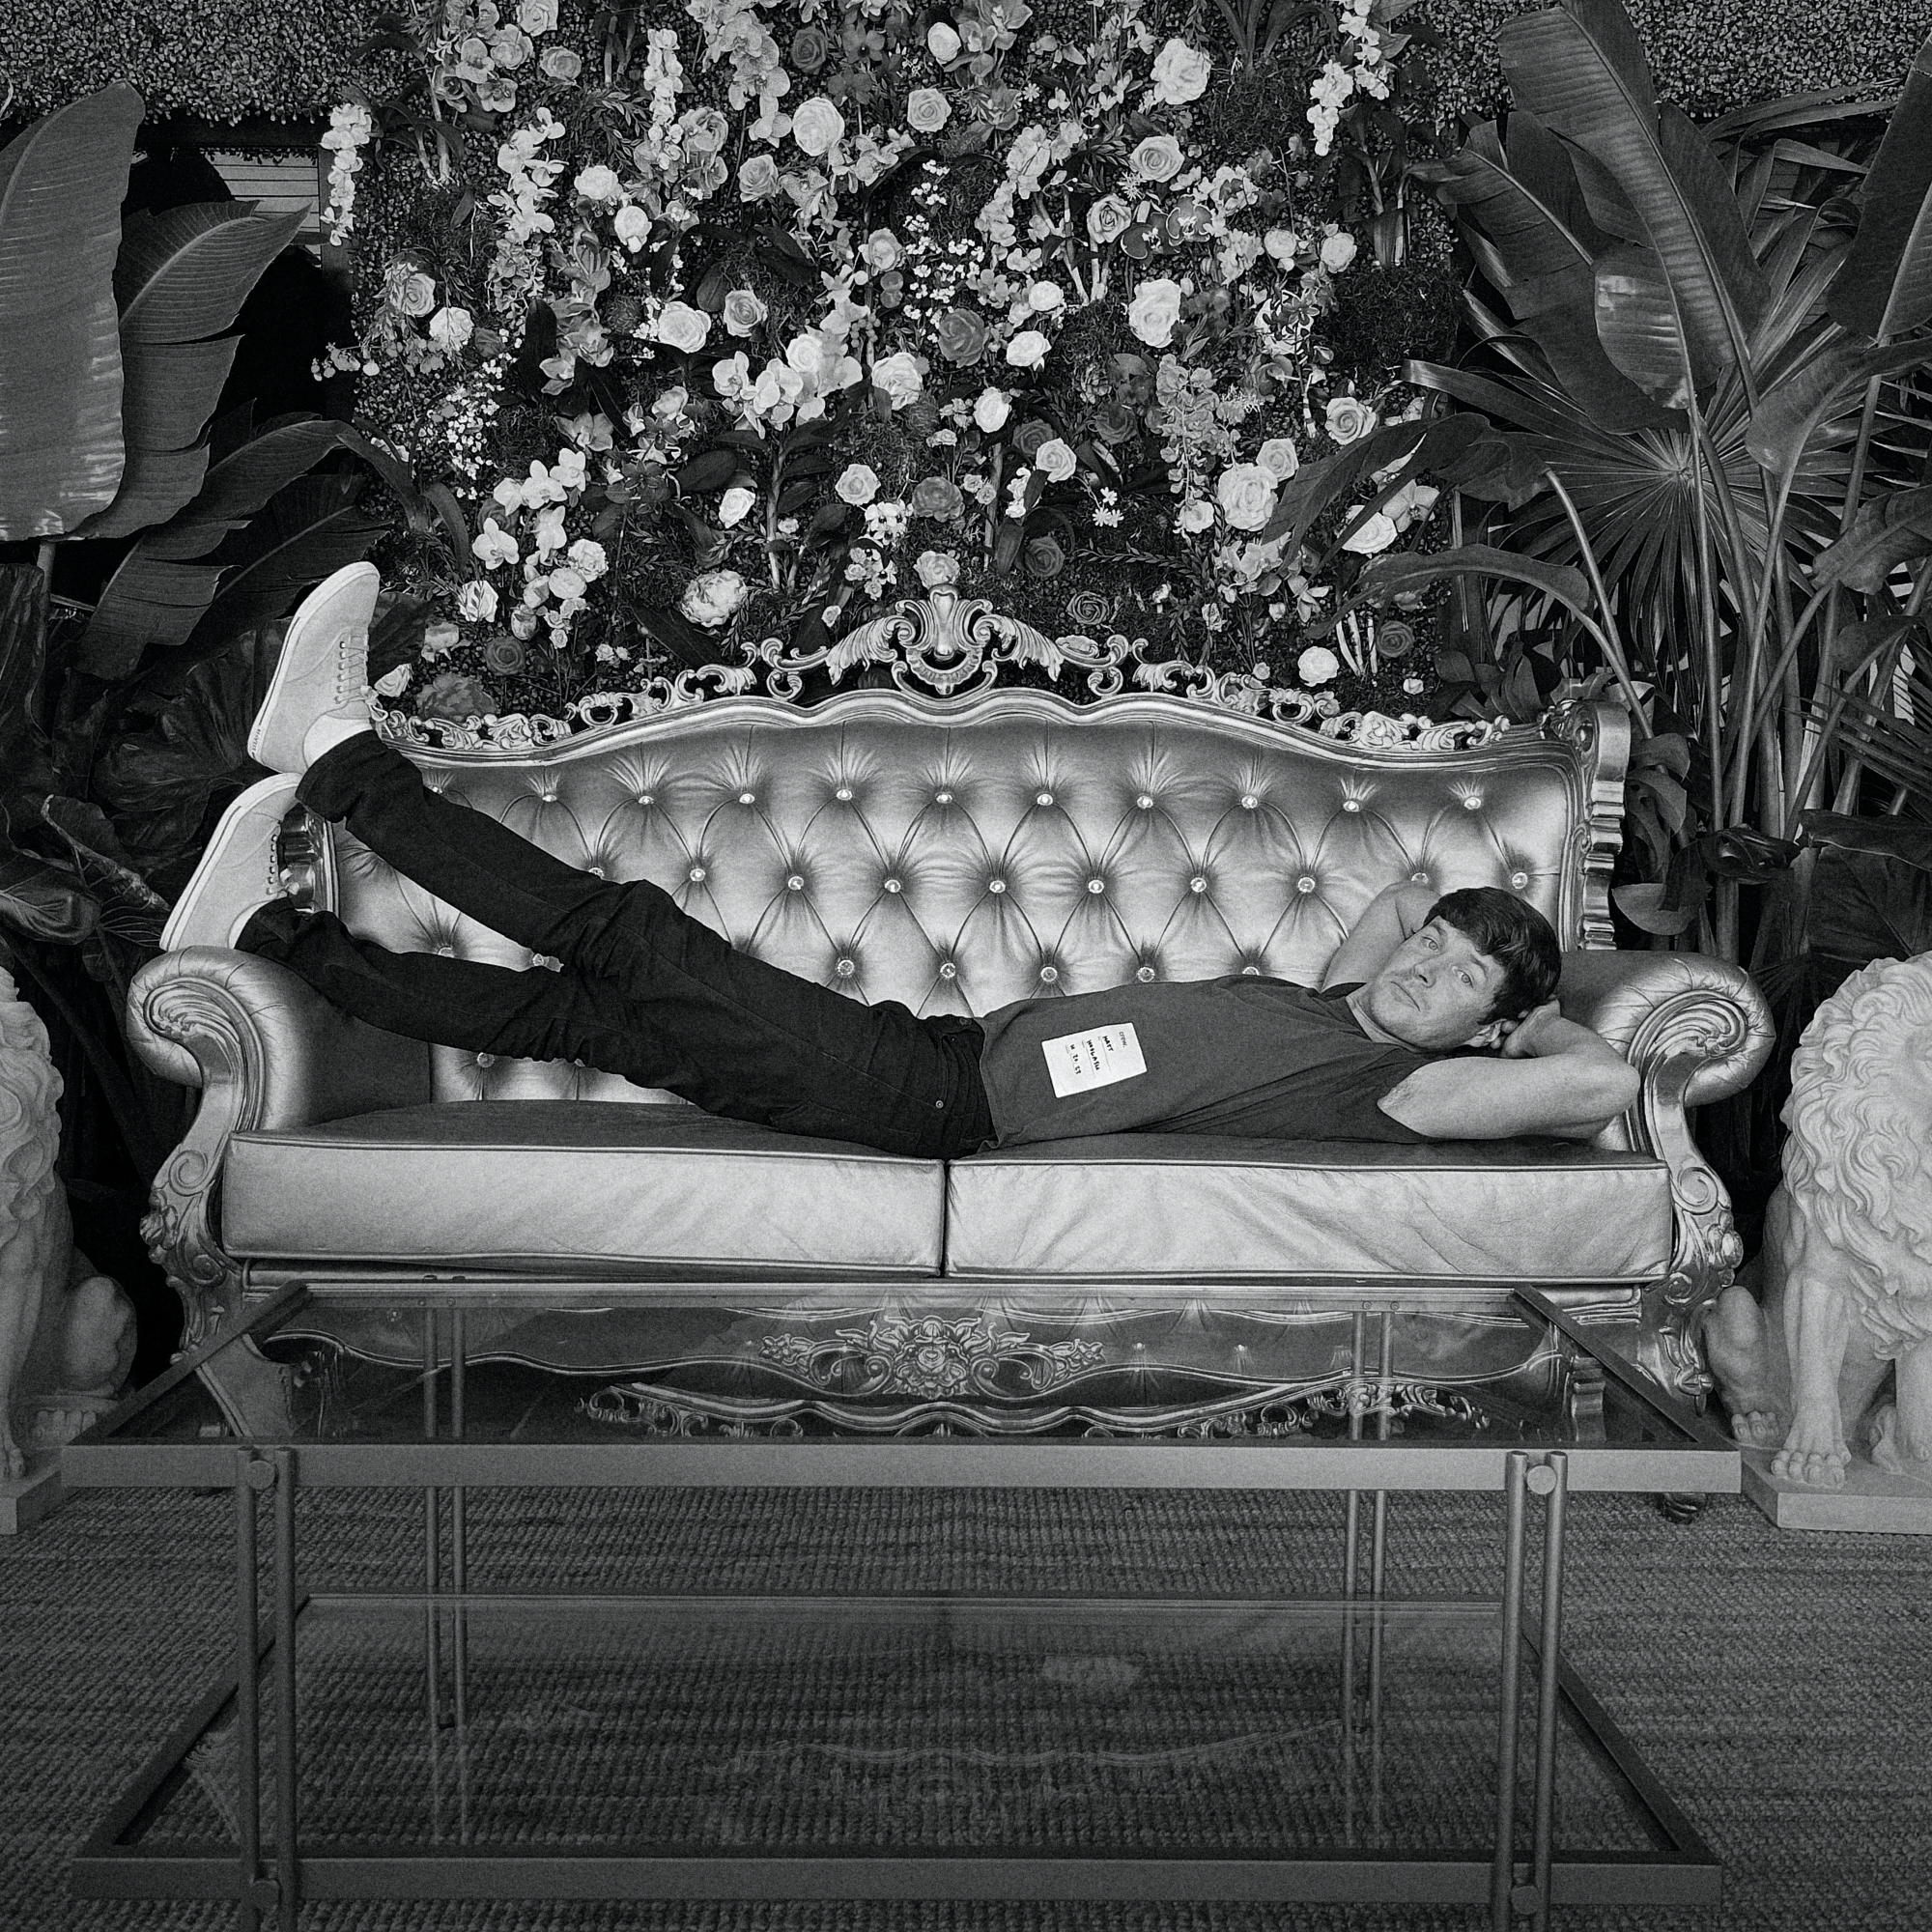 Man laying on ornate couch with floral backdrop during a film production.